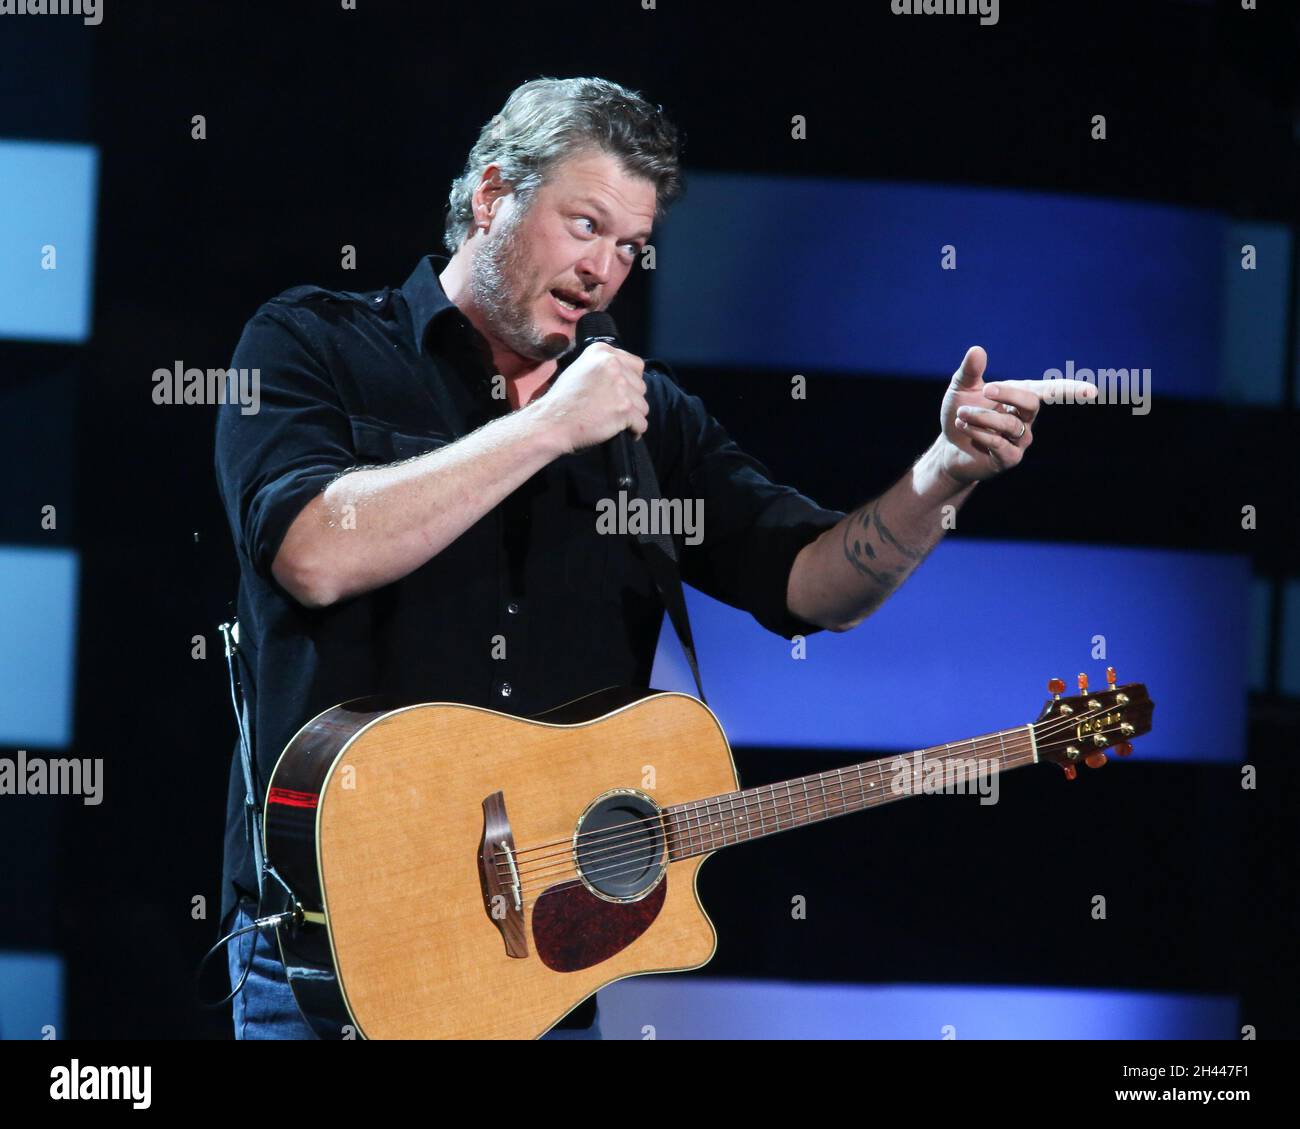 Austin, USA. 30th Oct, 2021. Blake Shelton performs at the iHeartCountry Festival at the Frank Erwin Center on Saturday, Oct. 30, 2021, in Austin, Texas. (Photo by Jack Plunkett/imageSPACE/Sipa USA) Credit: Sipa USA/Alamy Live News Stock Photo